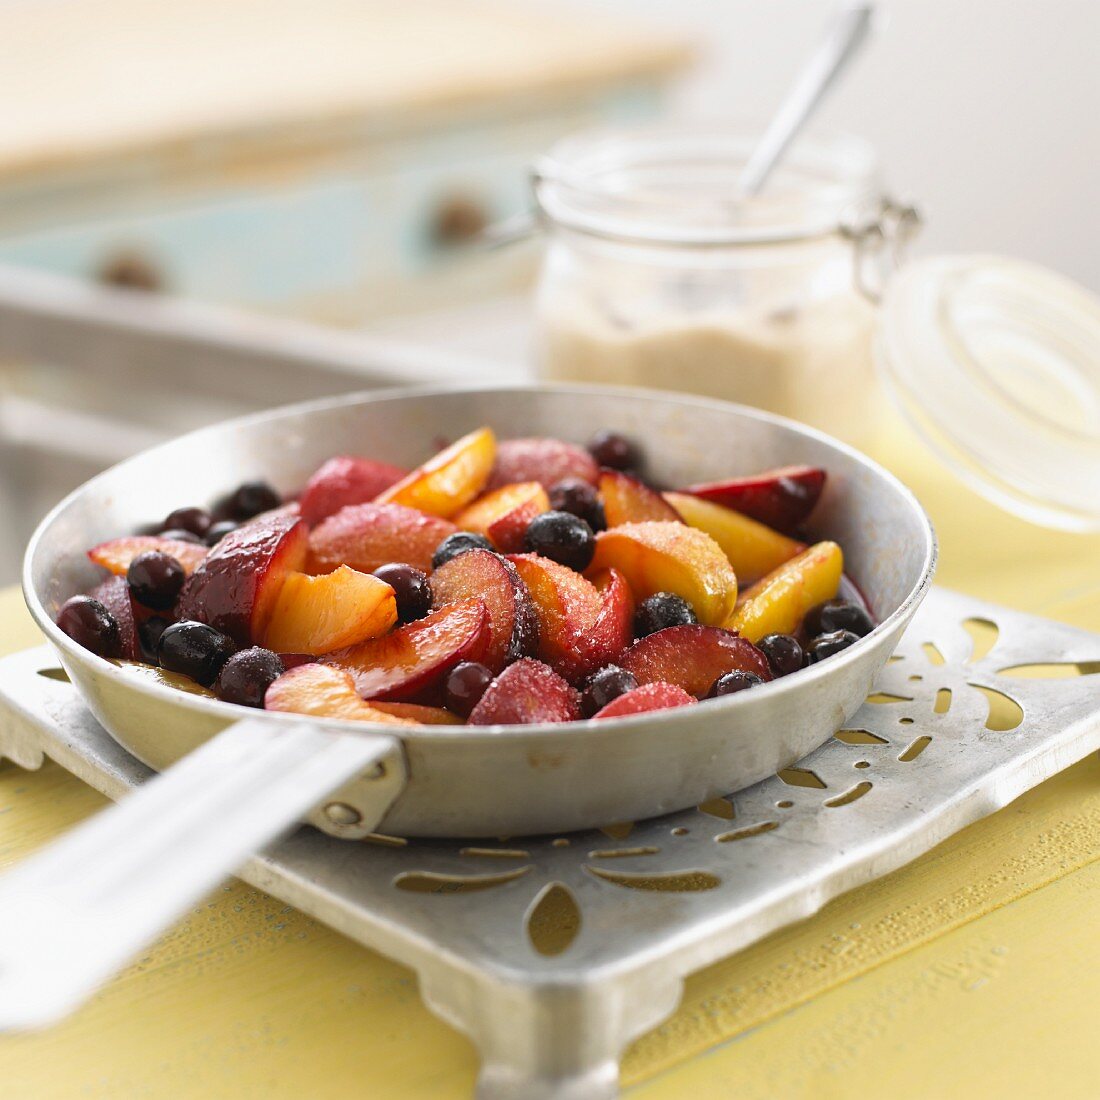 Fried peaches and plums